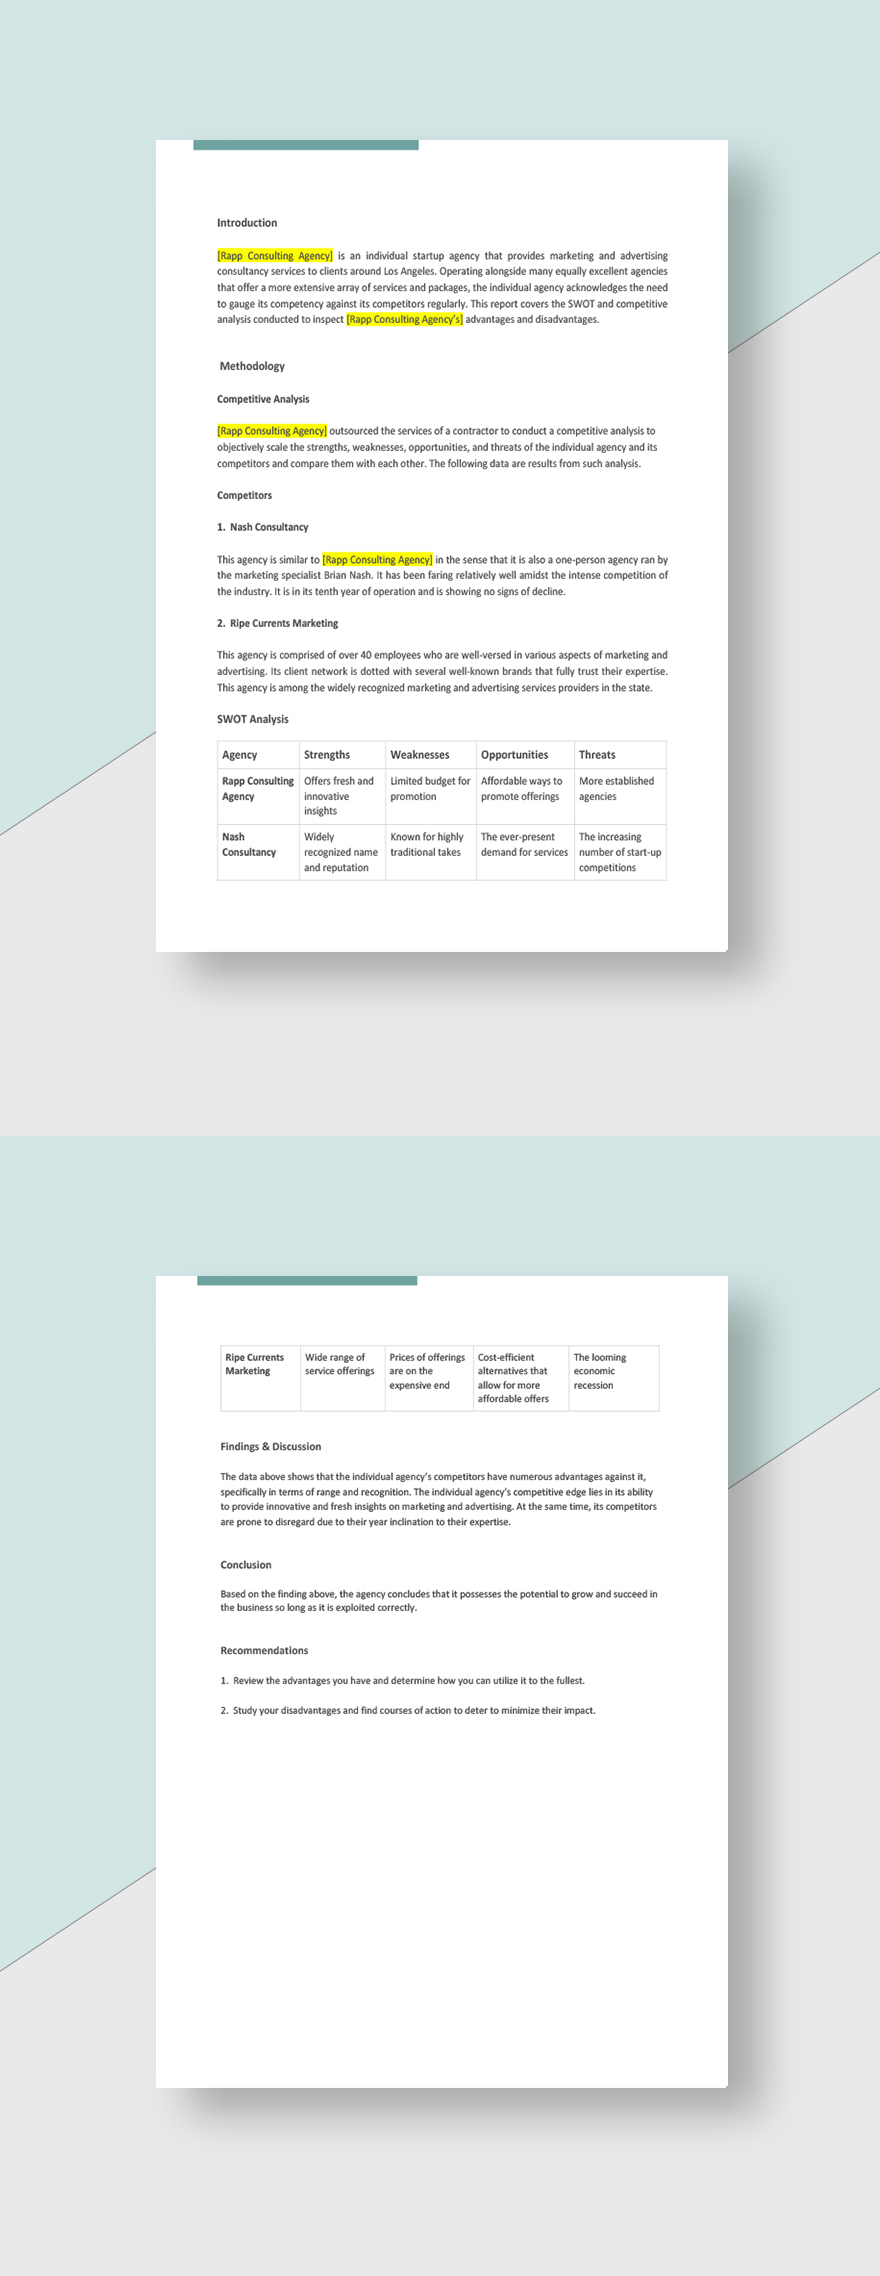 Individual Agency Report Template